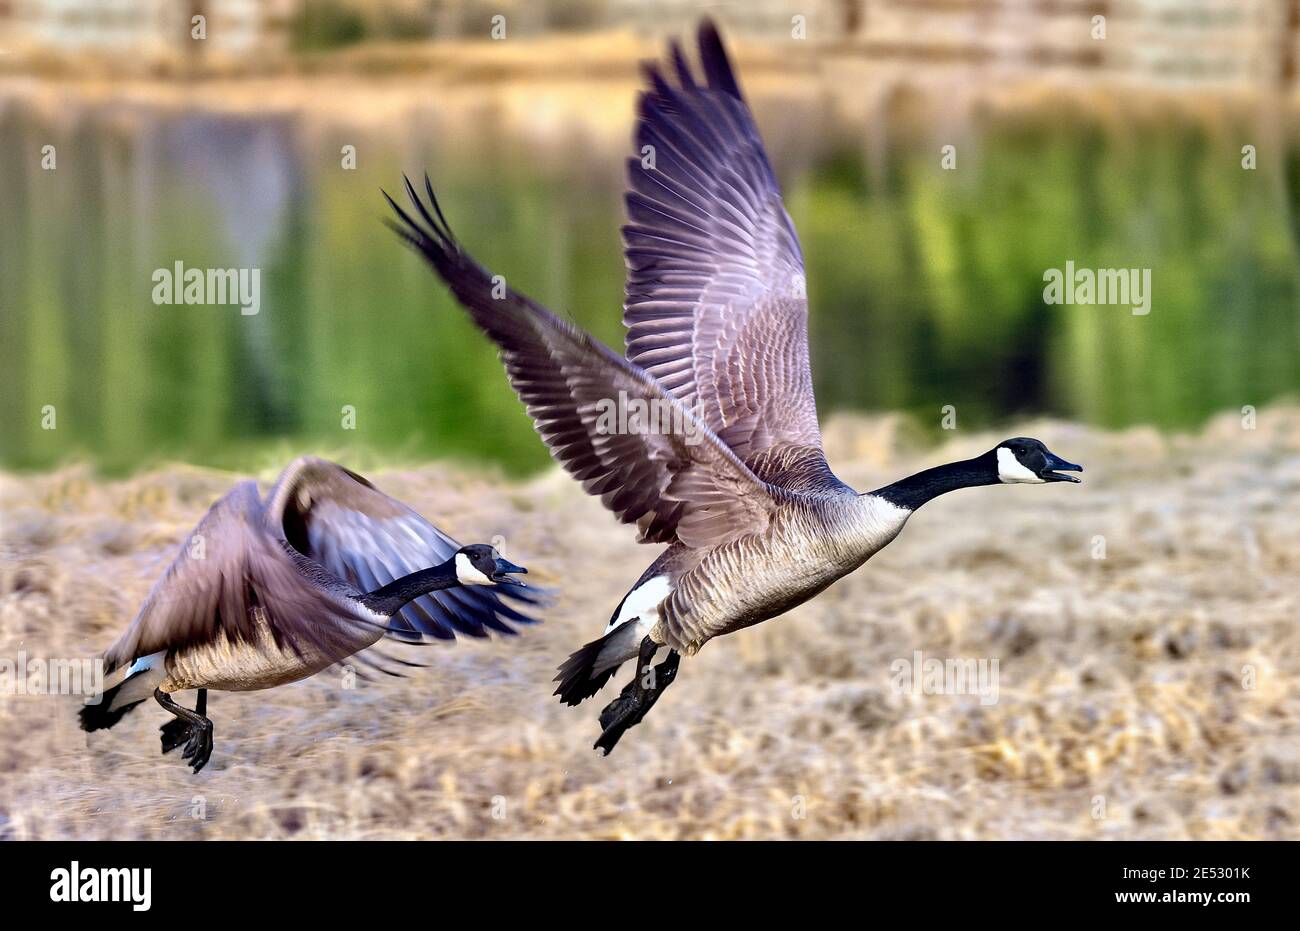 Two Canada Geese 'Branta canadensis', taking flight from a lake shore in rural Alberta Canada Stock Photo